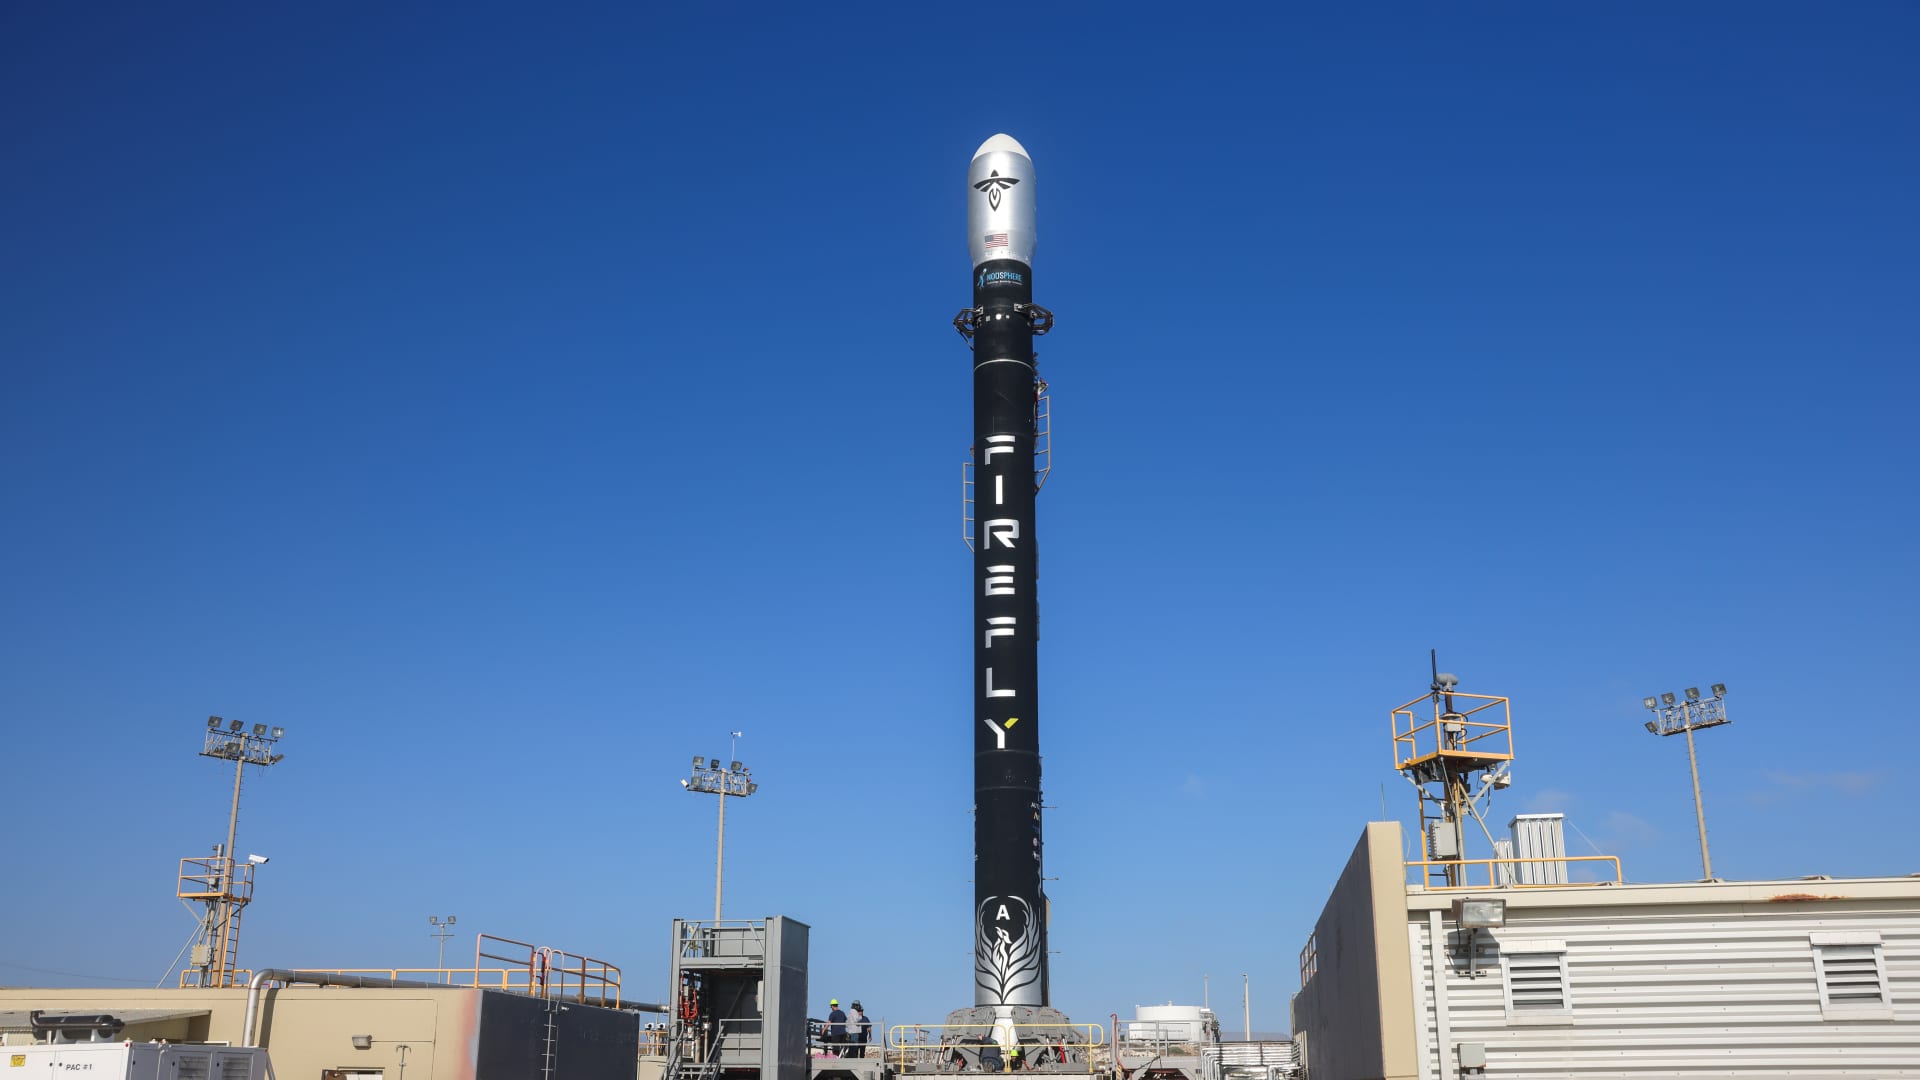 Firefly Aerospace's Alpha rocket stands on the launchpad at Vandenberg Space Force Base in California on September 2, 2021.